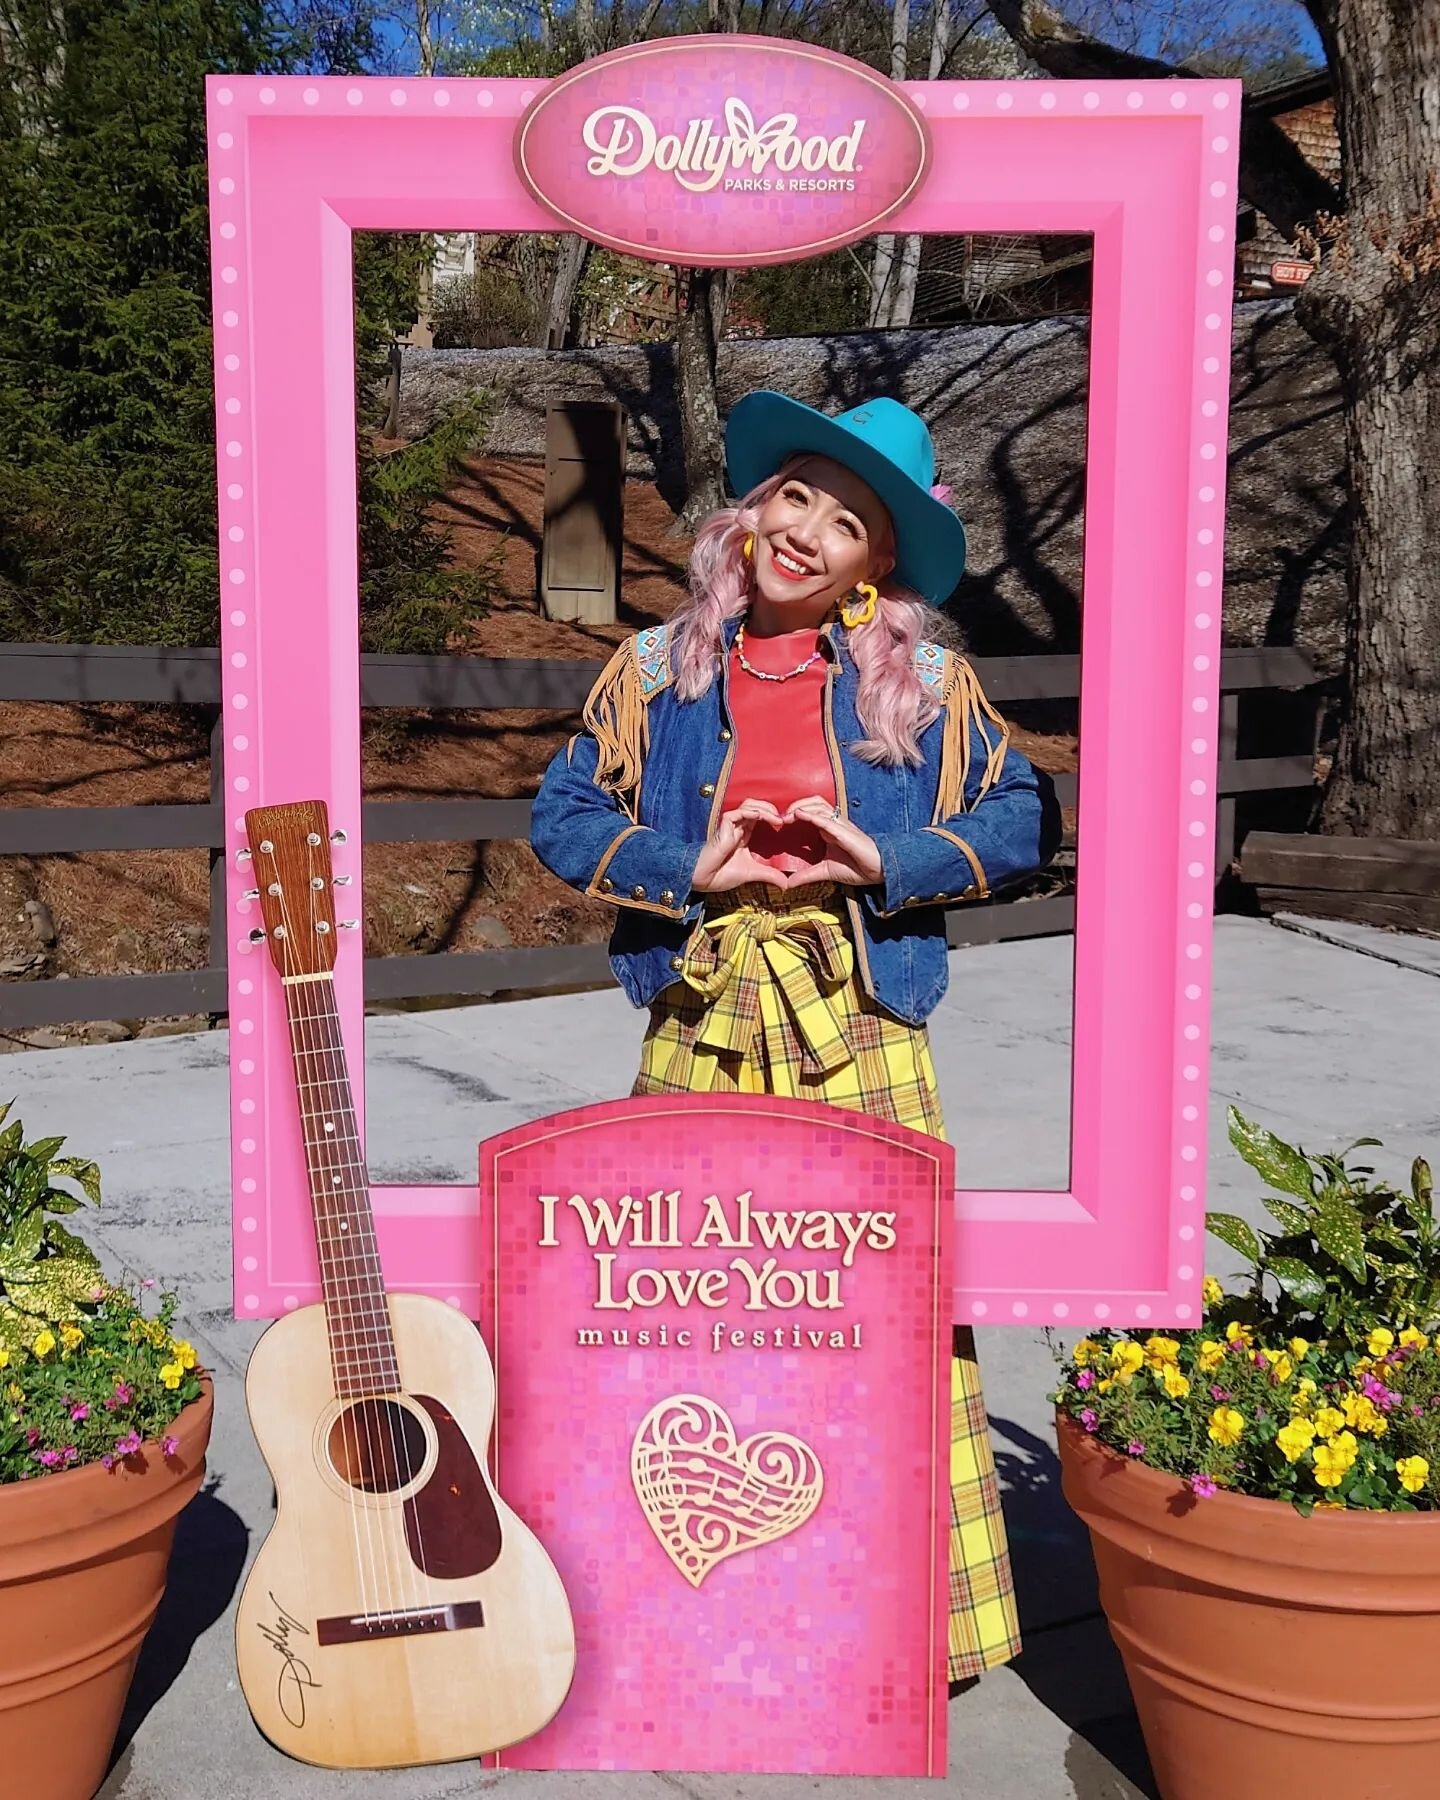 🌸🌼&nbsp;🫶💖🌷🍀
Day 3 @dollywood I will Always Love You Music Festival was super PRETTY but really COLD!!!🥶💦 Though my heart was warmed by so many beautiful people💖 a couple who saw me as an college student singing Roly Poly, people who was the